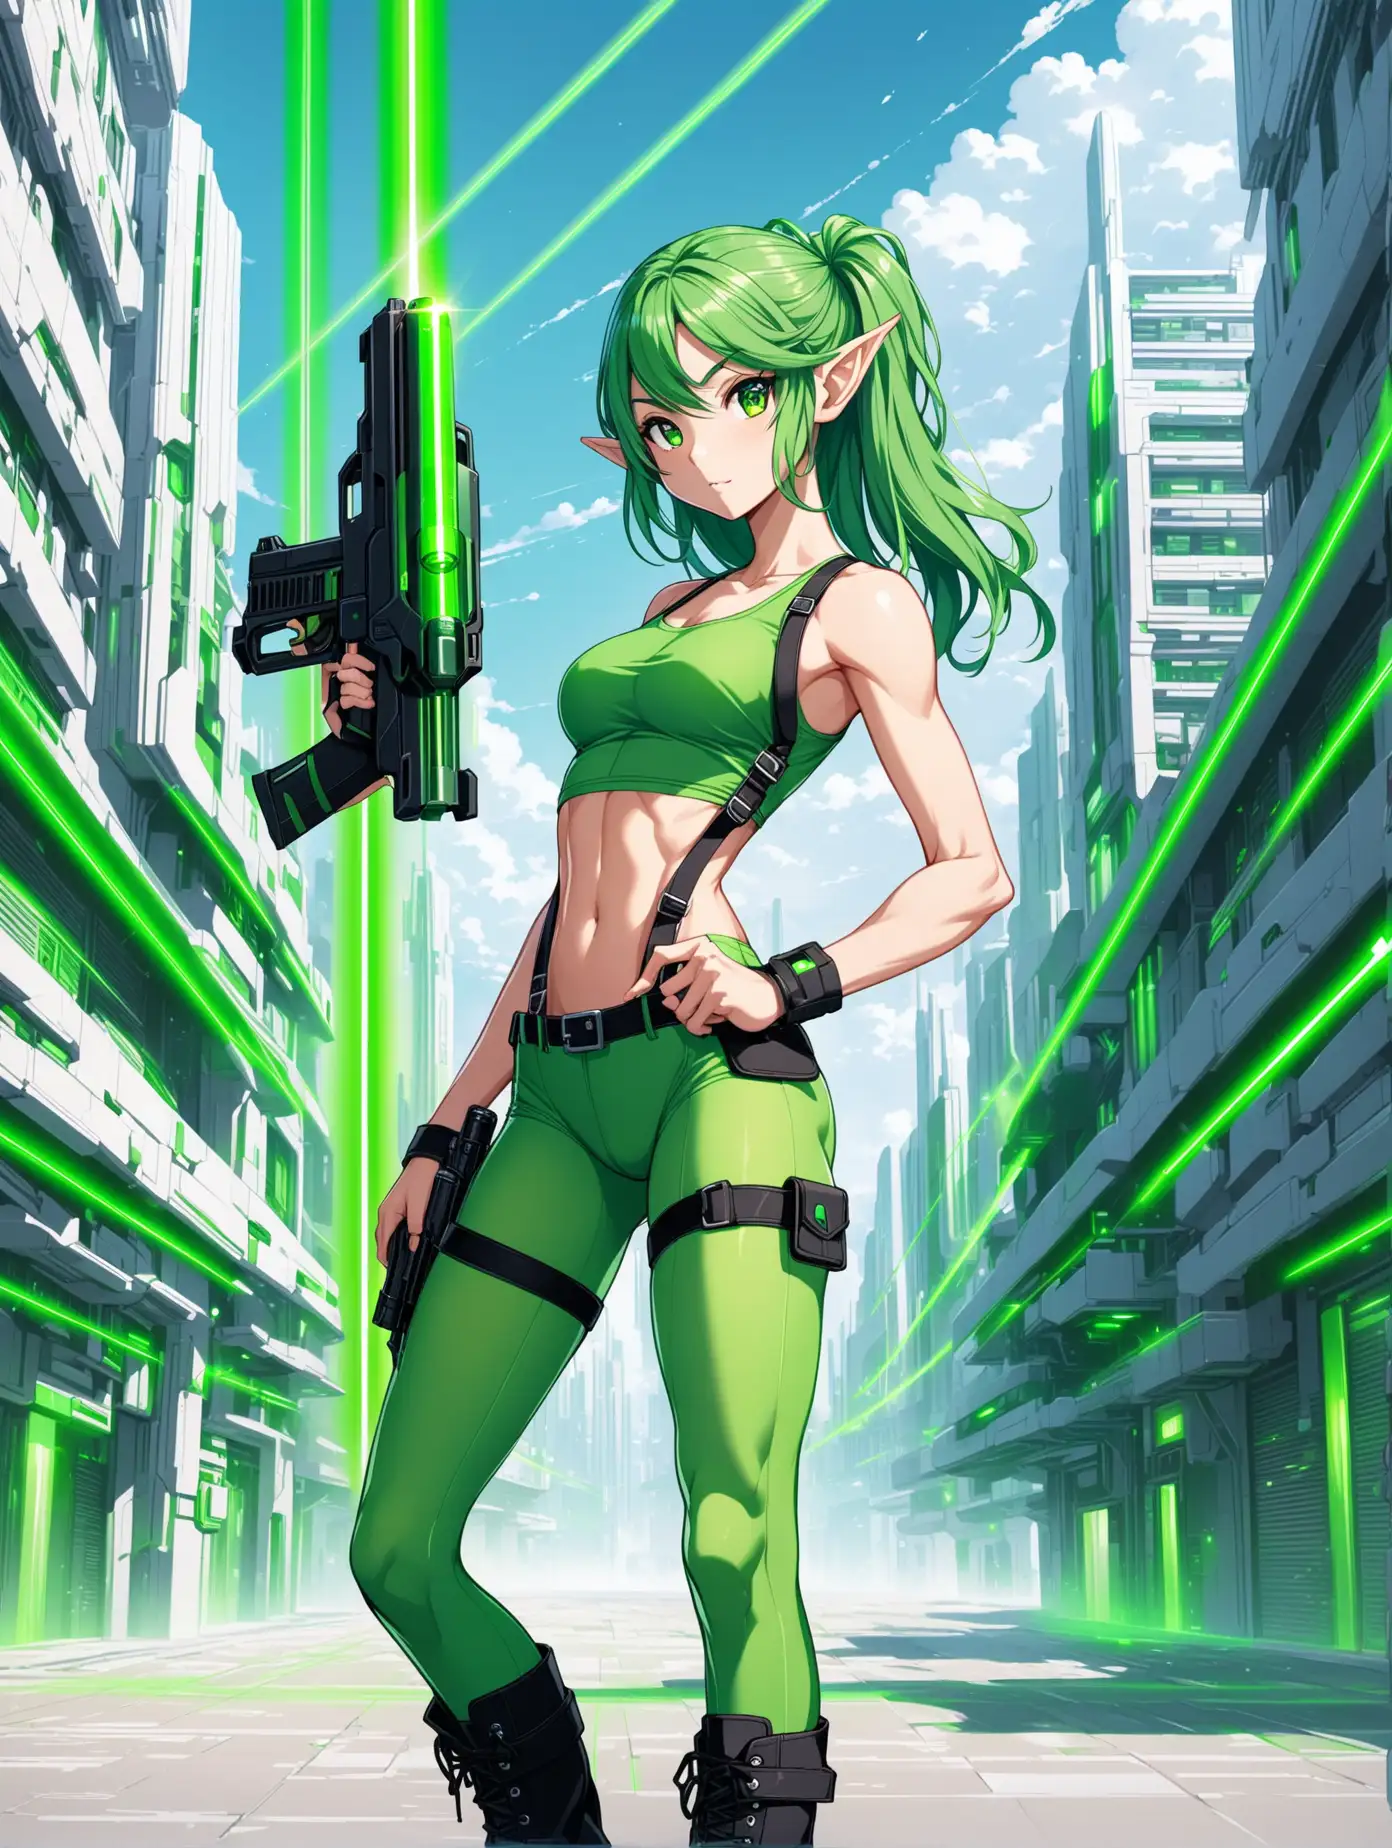 sexy fit 24 year old hero girl, side shave green hair, green eyes, elf ears, posing with green laser gun in futuristic town, super skinny toned body, short green tank top, sexy midriff, wearing suspenders, green tights, holsters on each thigh, combat boots, green black white 3 color minimal design